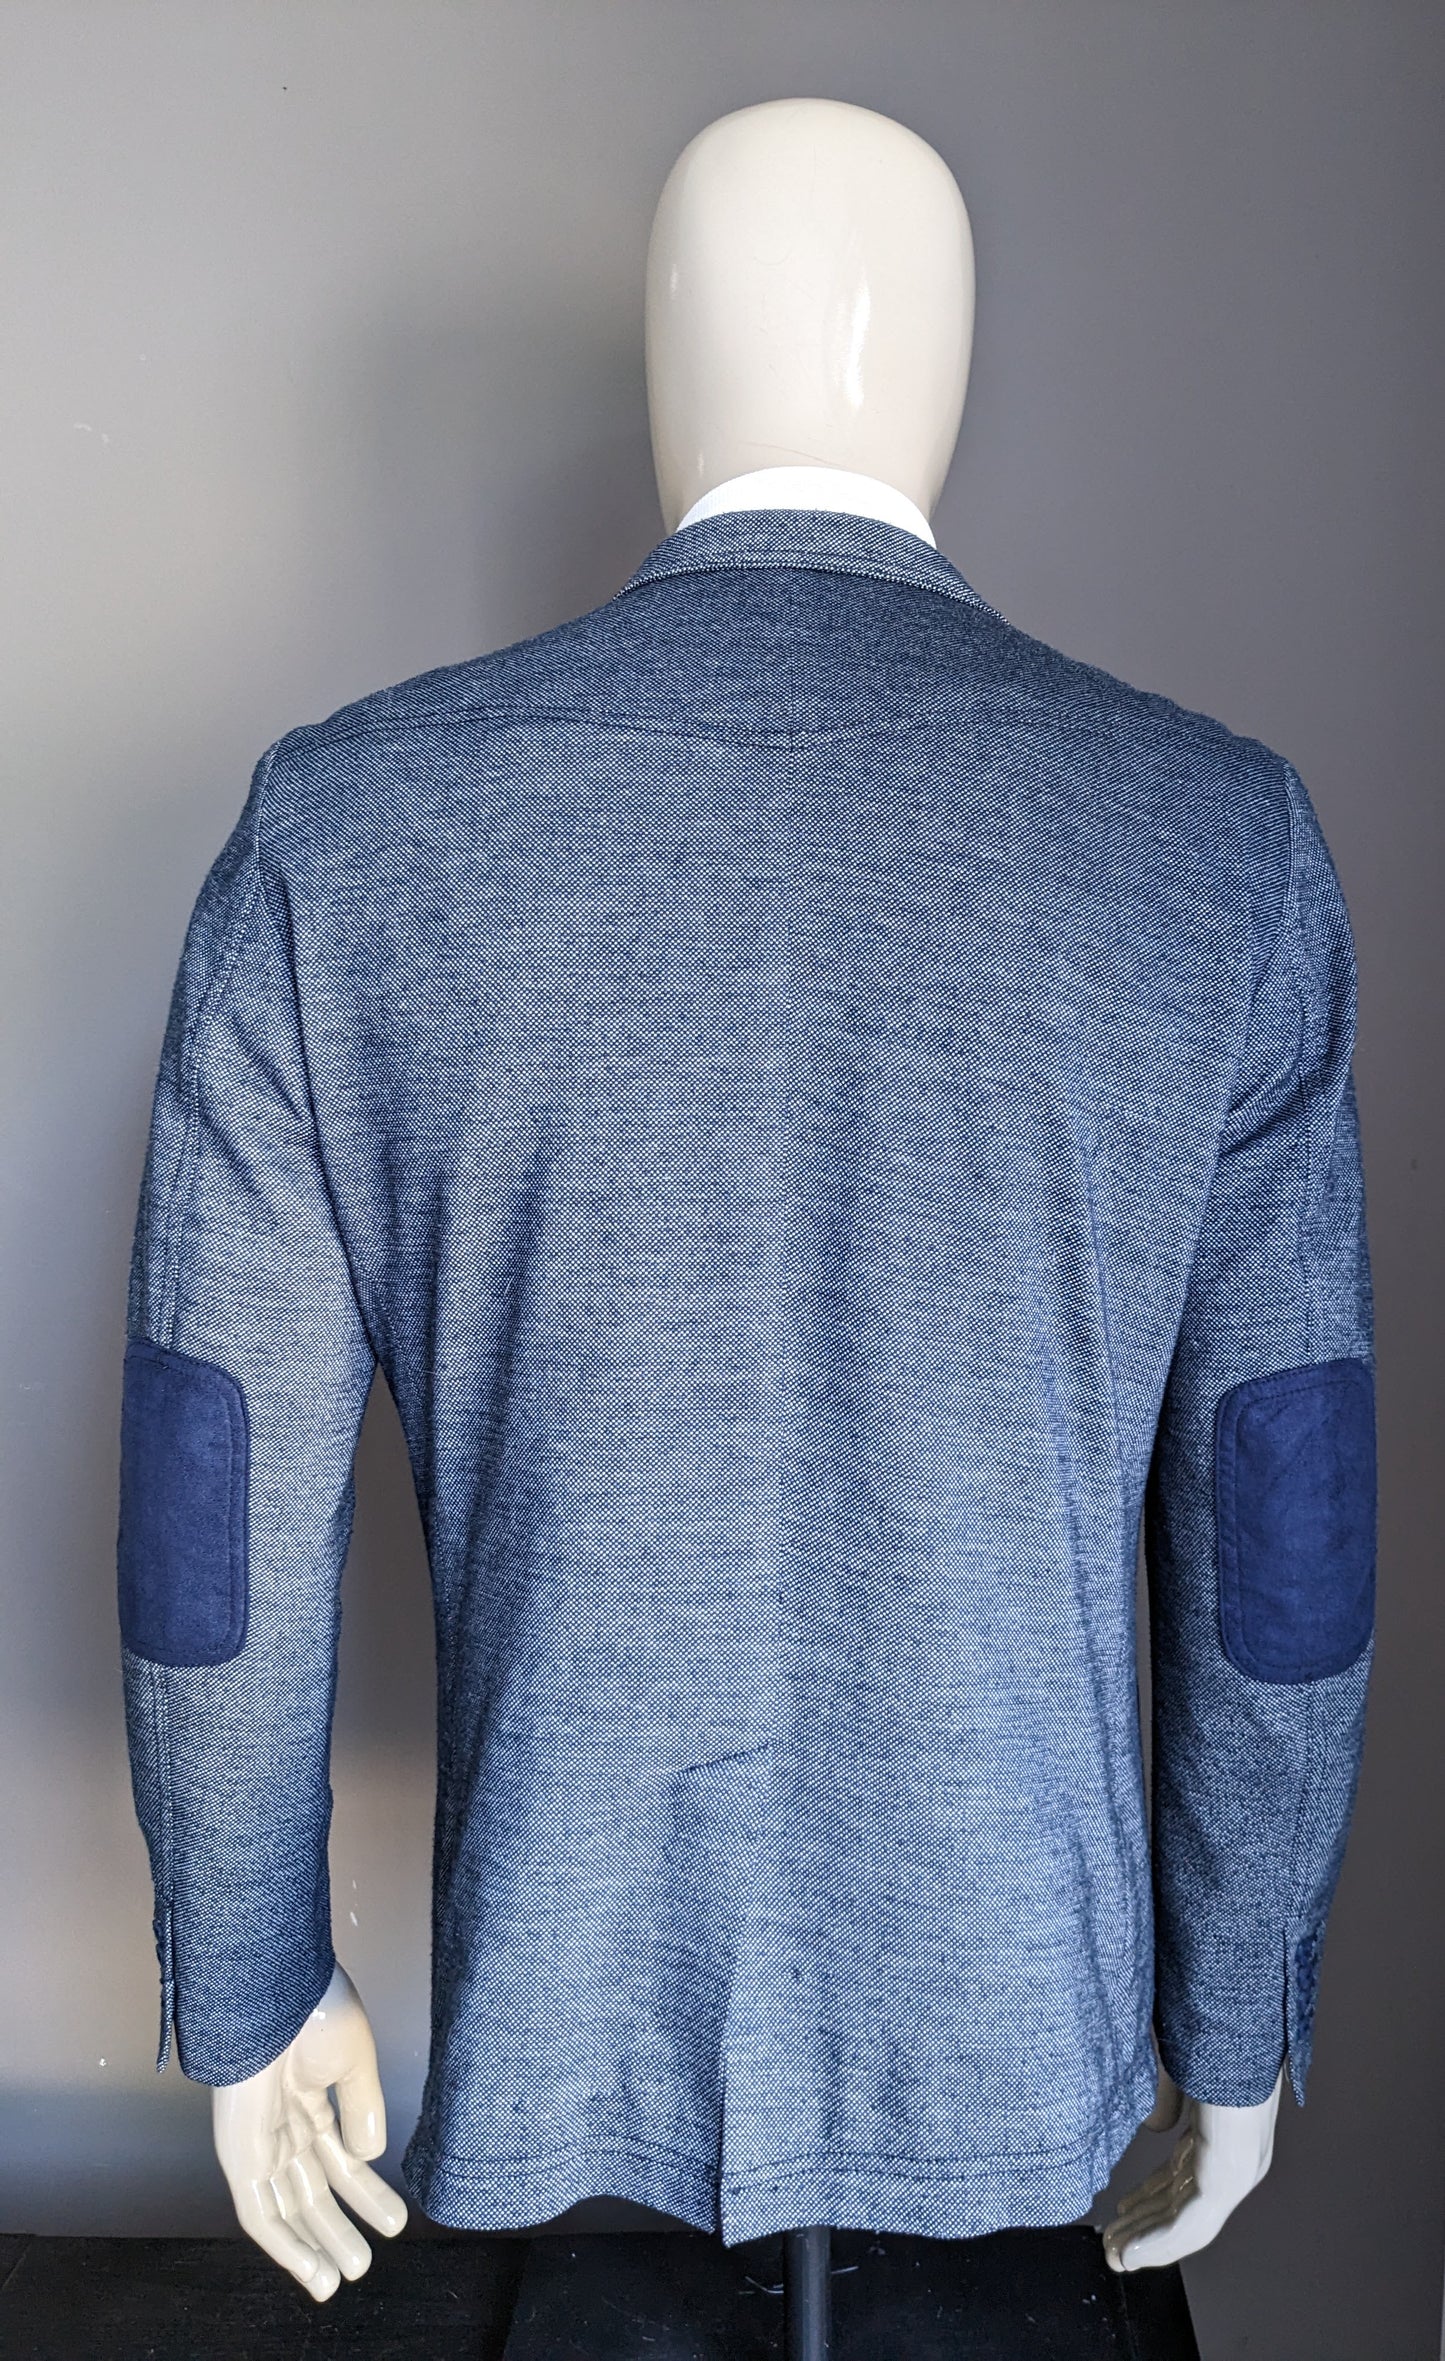 Soho Casual Colbert with elbow patches. Blue gray mixed. Size 50 / M.